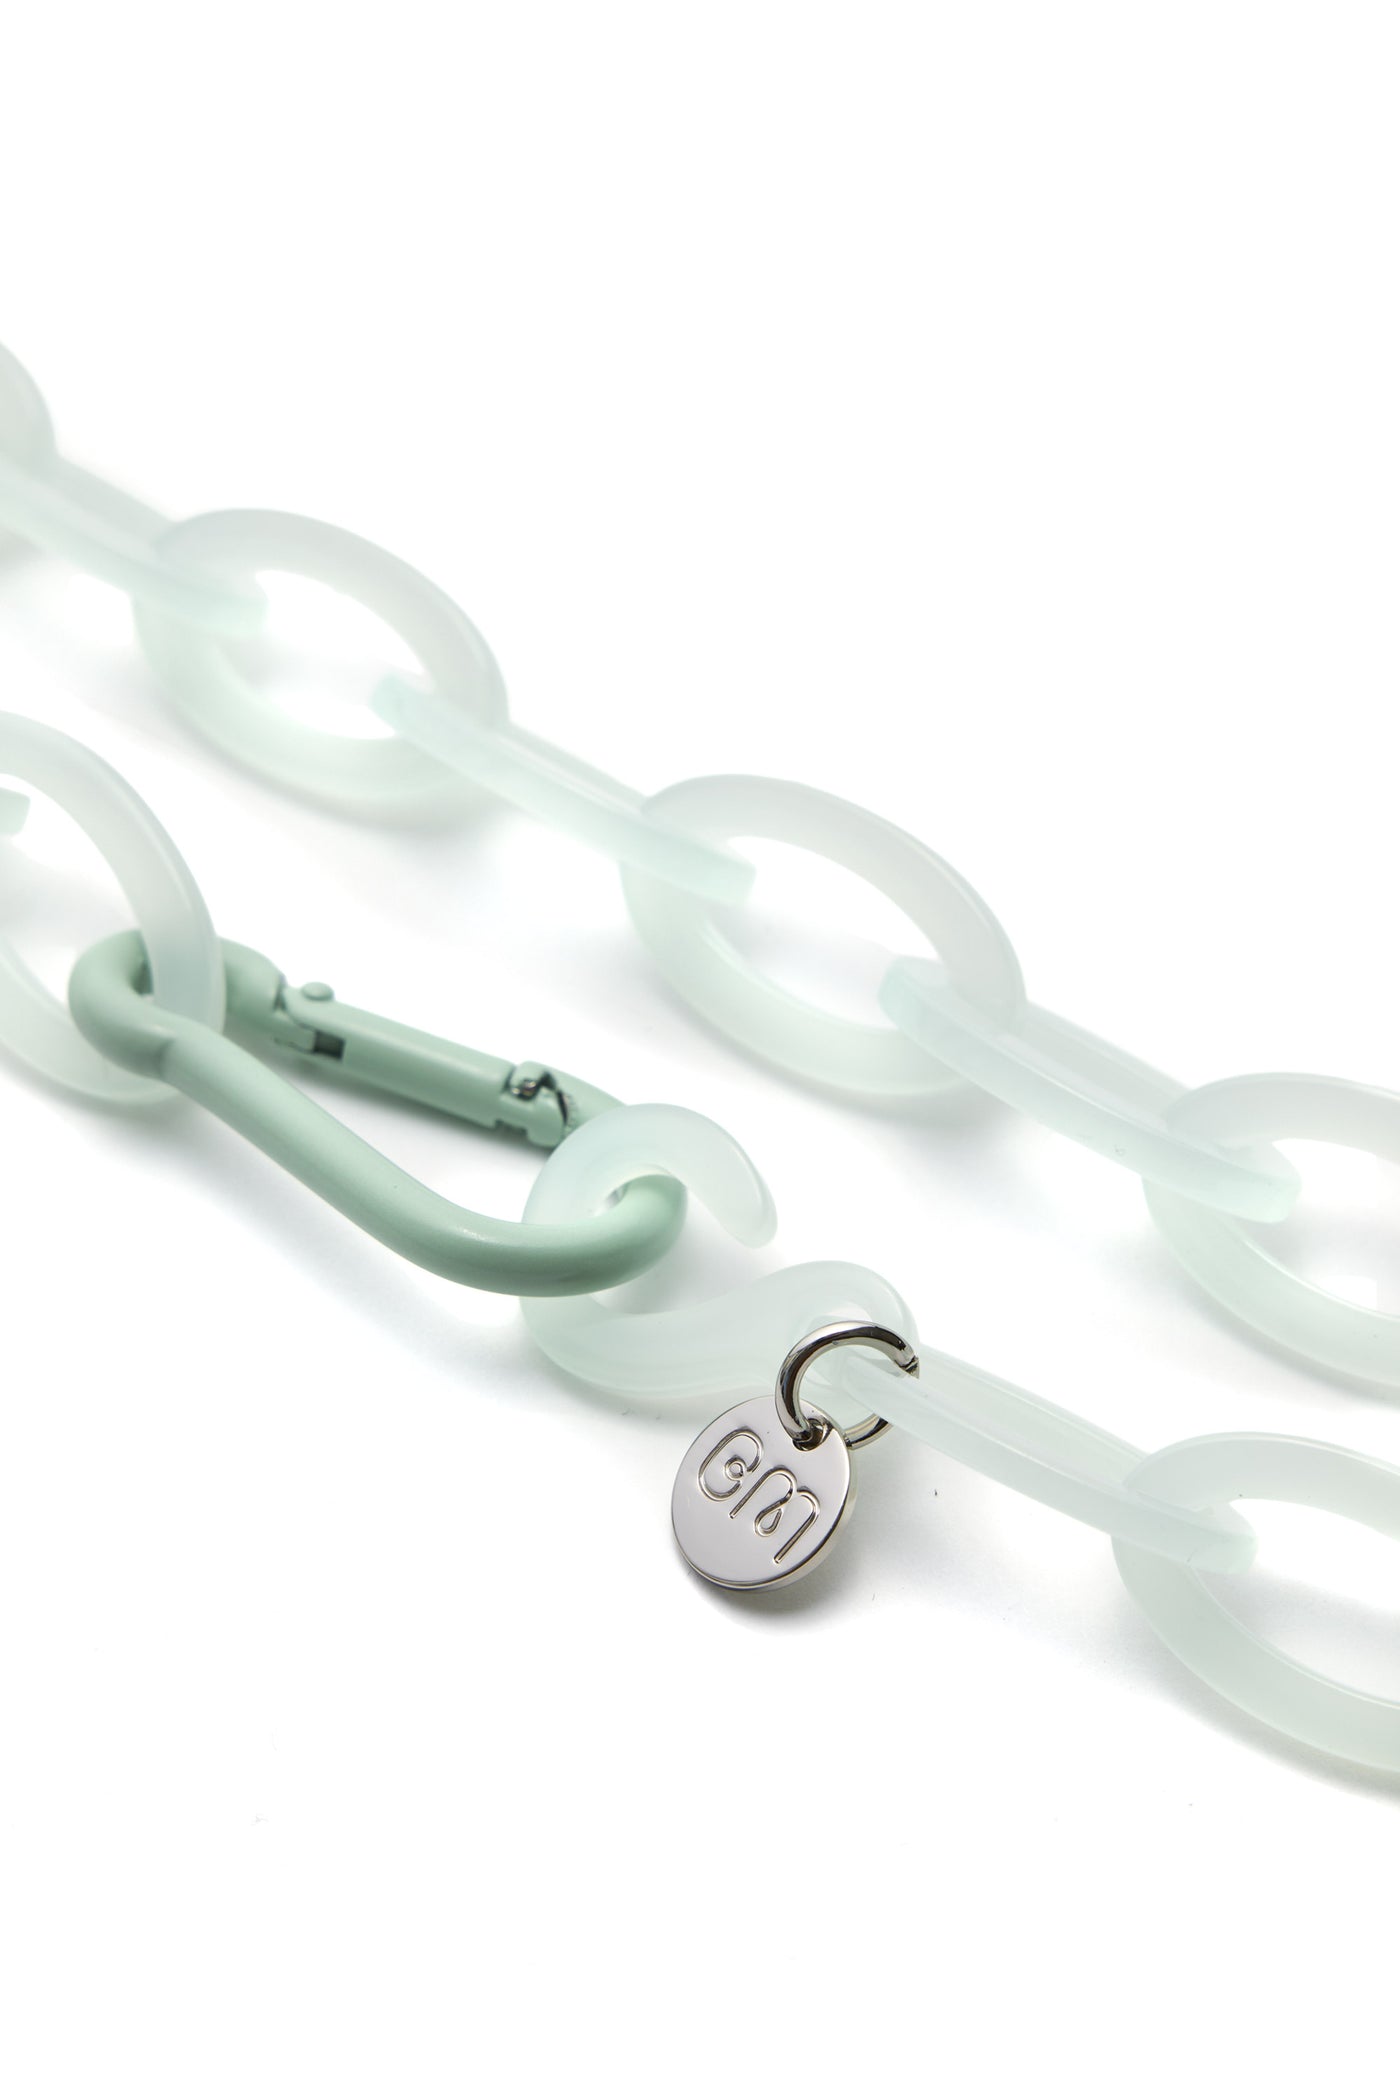 Bianca Mavrick Jewellery Mint Chain Link Necklace Carabiner Clasp Detail